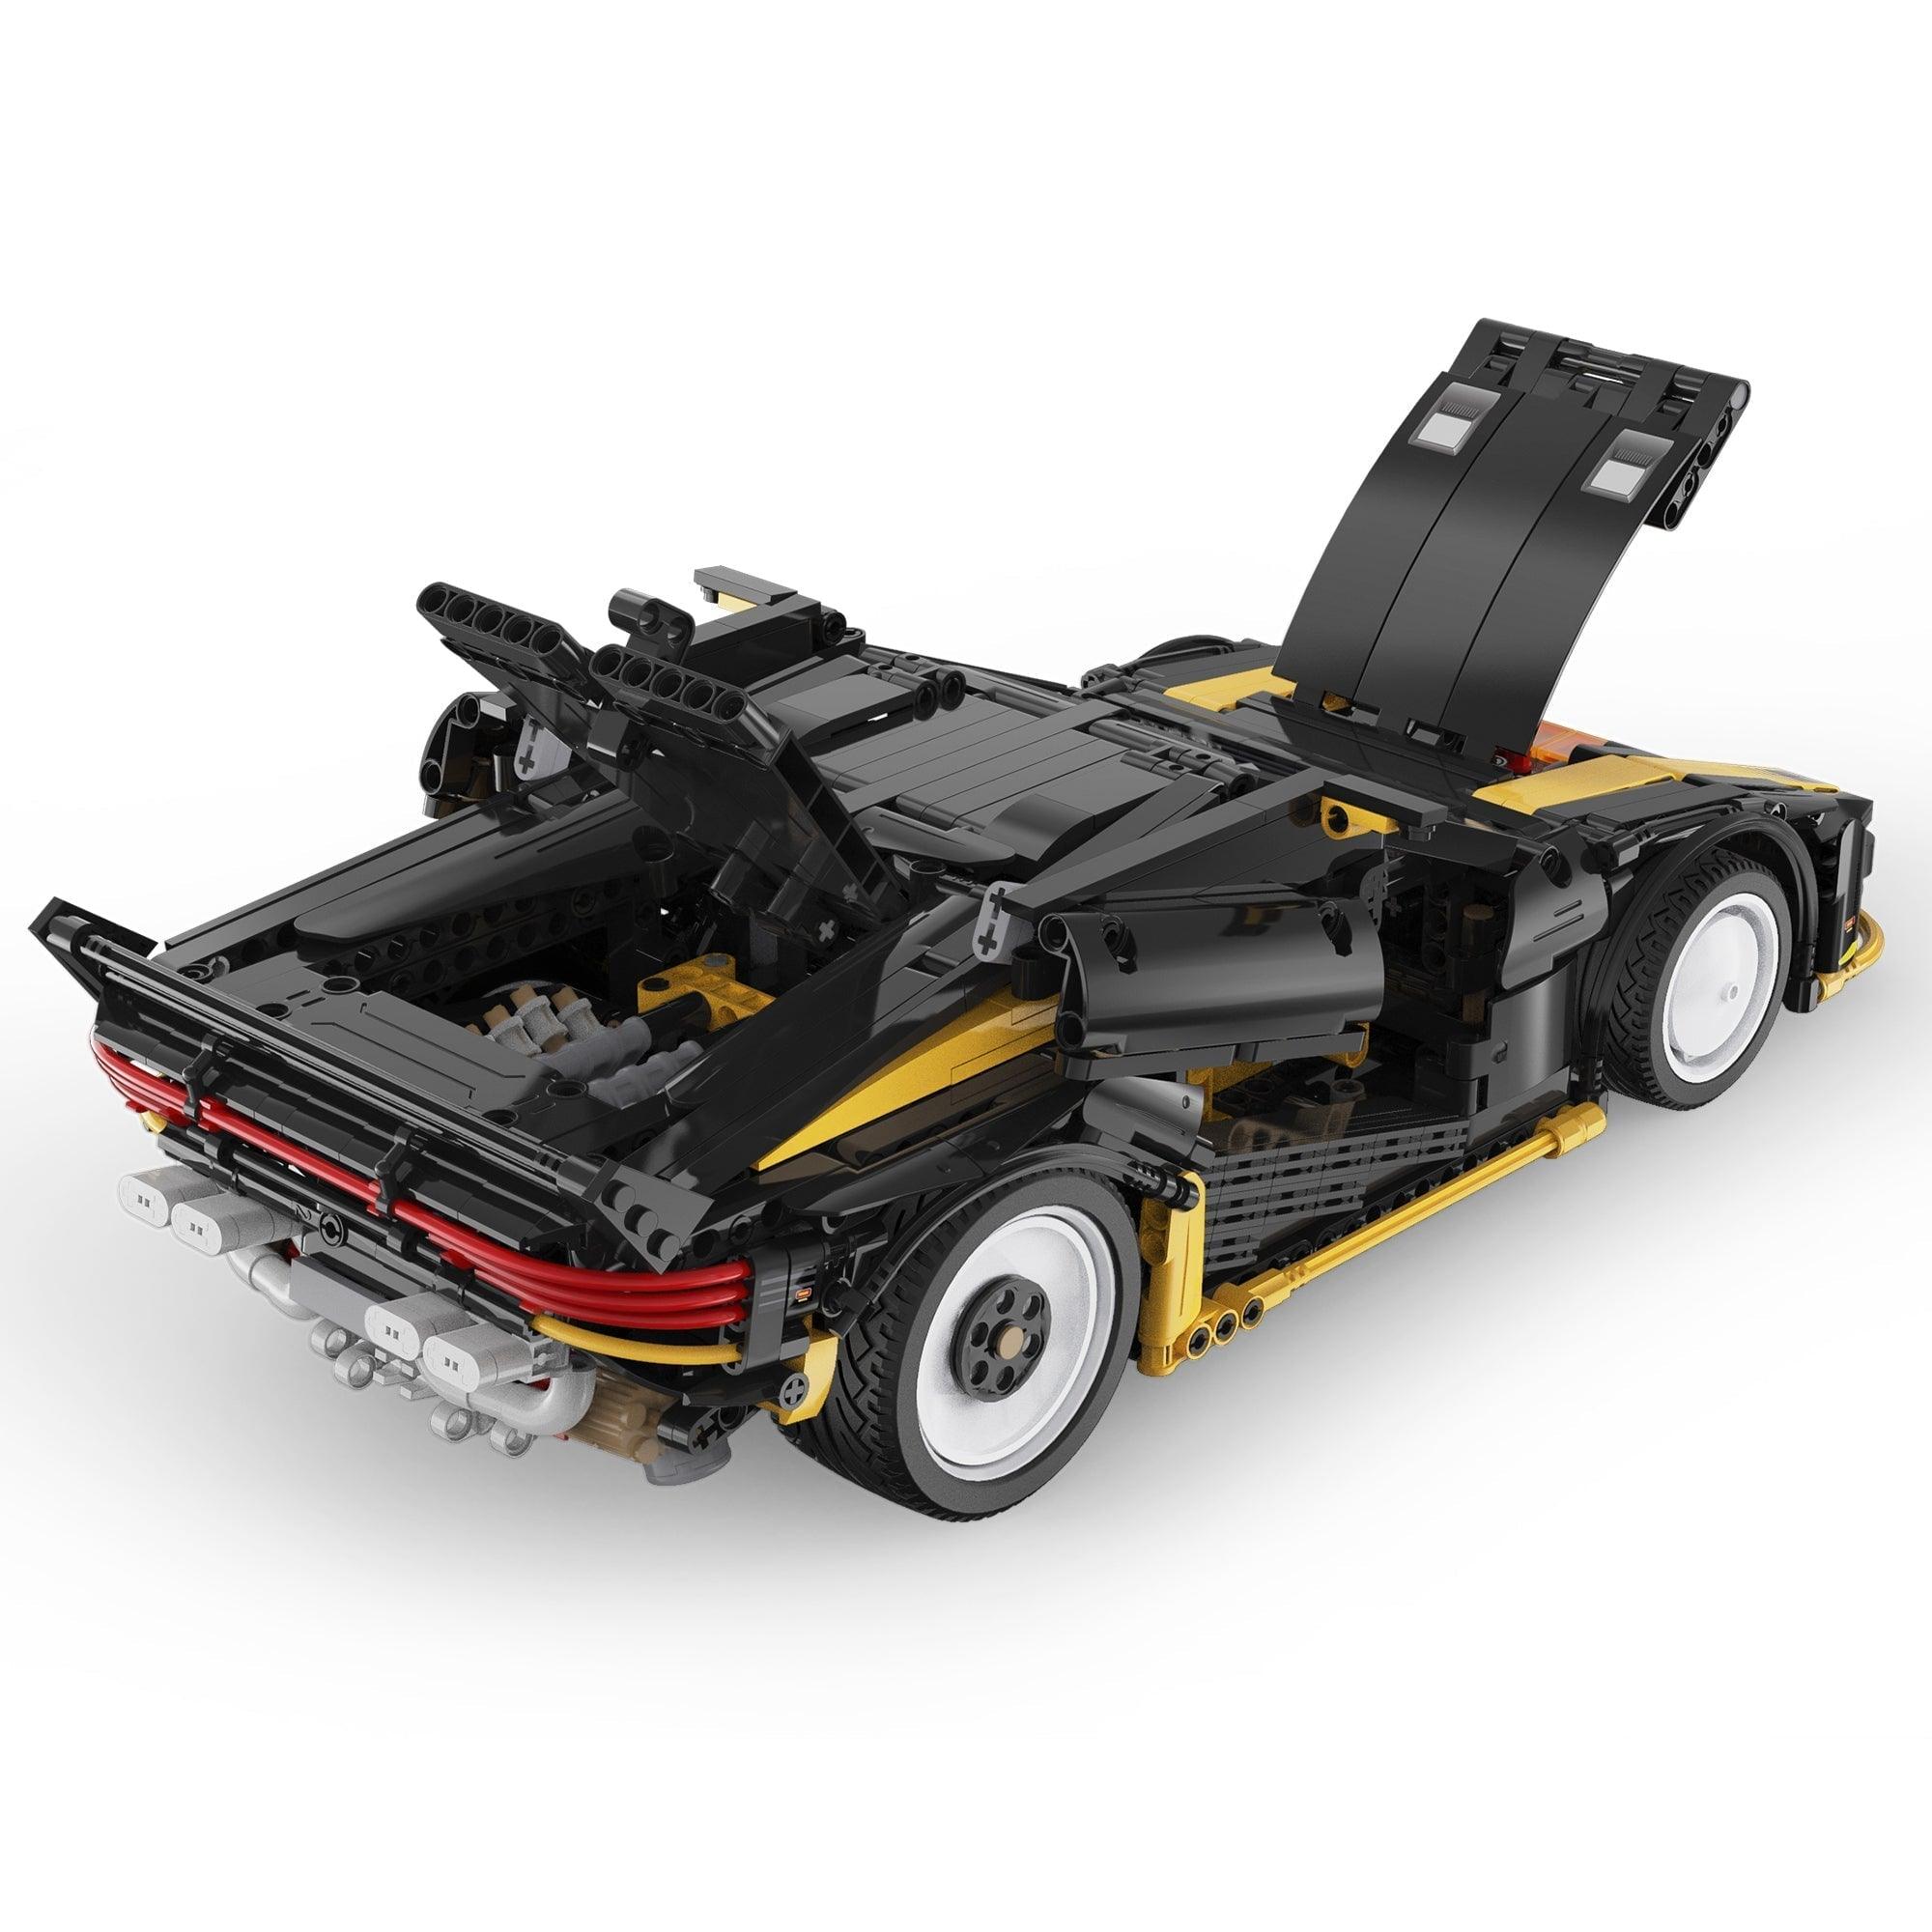 Cyberpunk Turbo-V s set, compatible with Lego